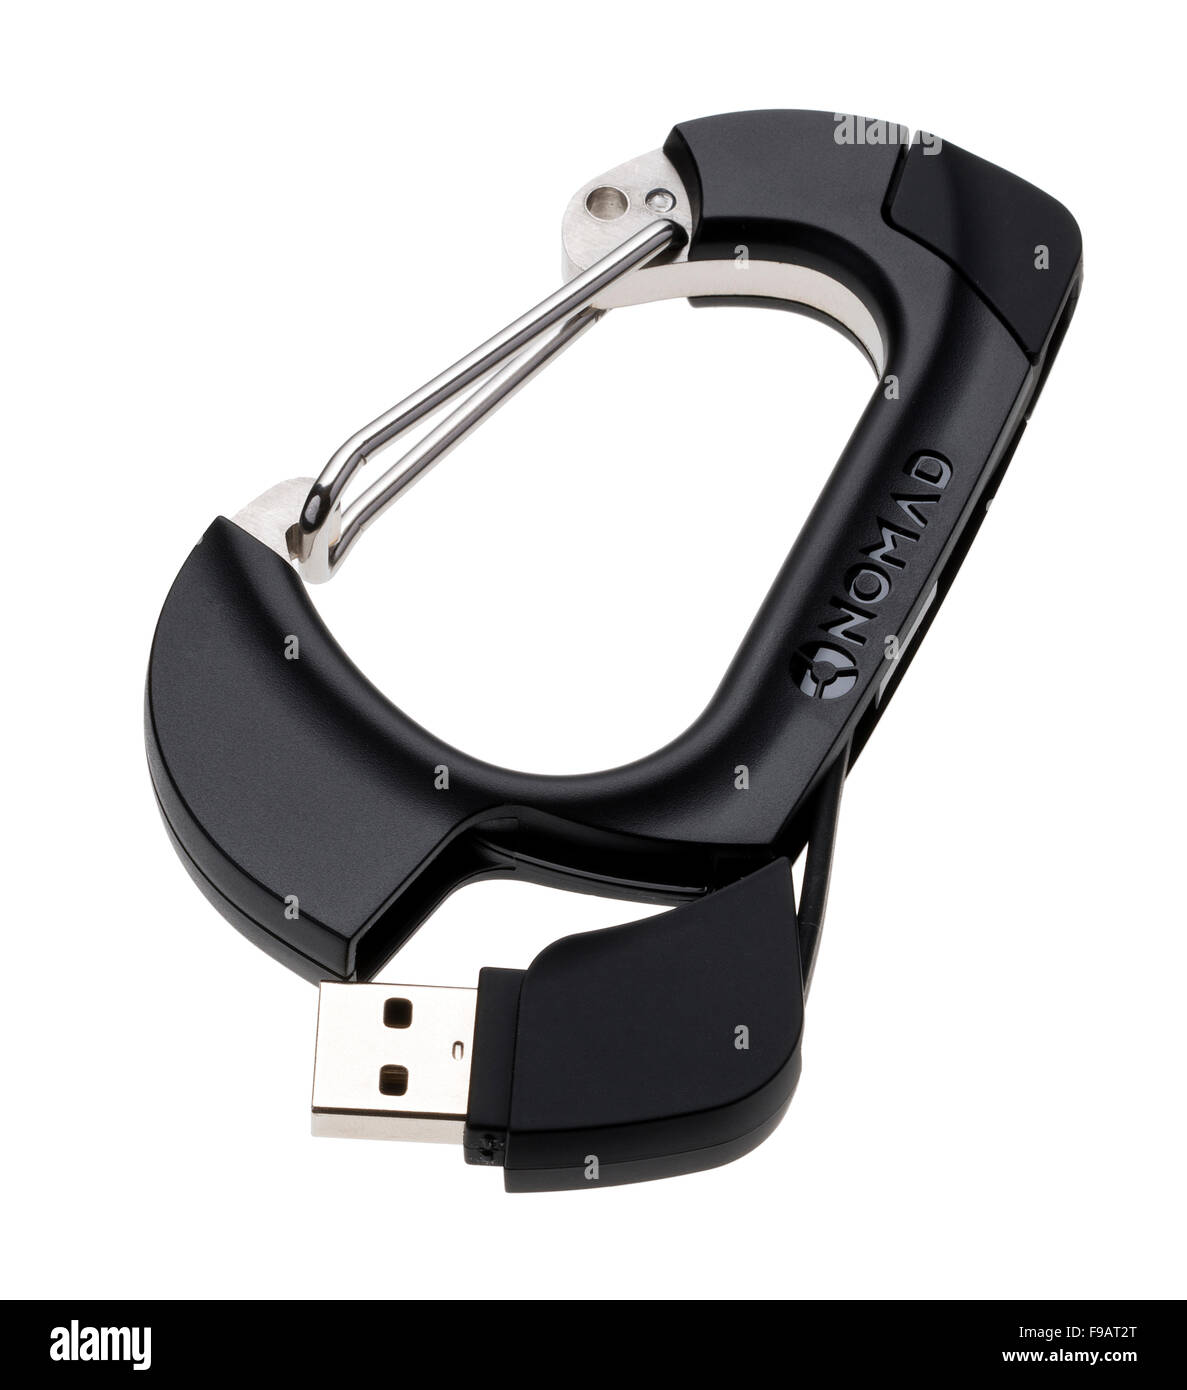 Nomad clip carabiner with USB charging cable to Apple Lightning or micro USB. Stock Photo